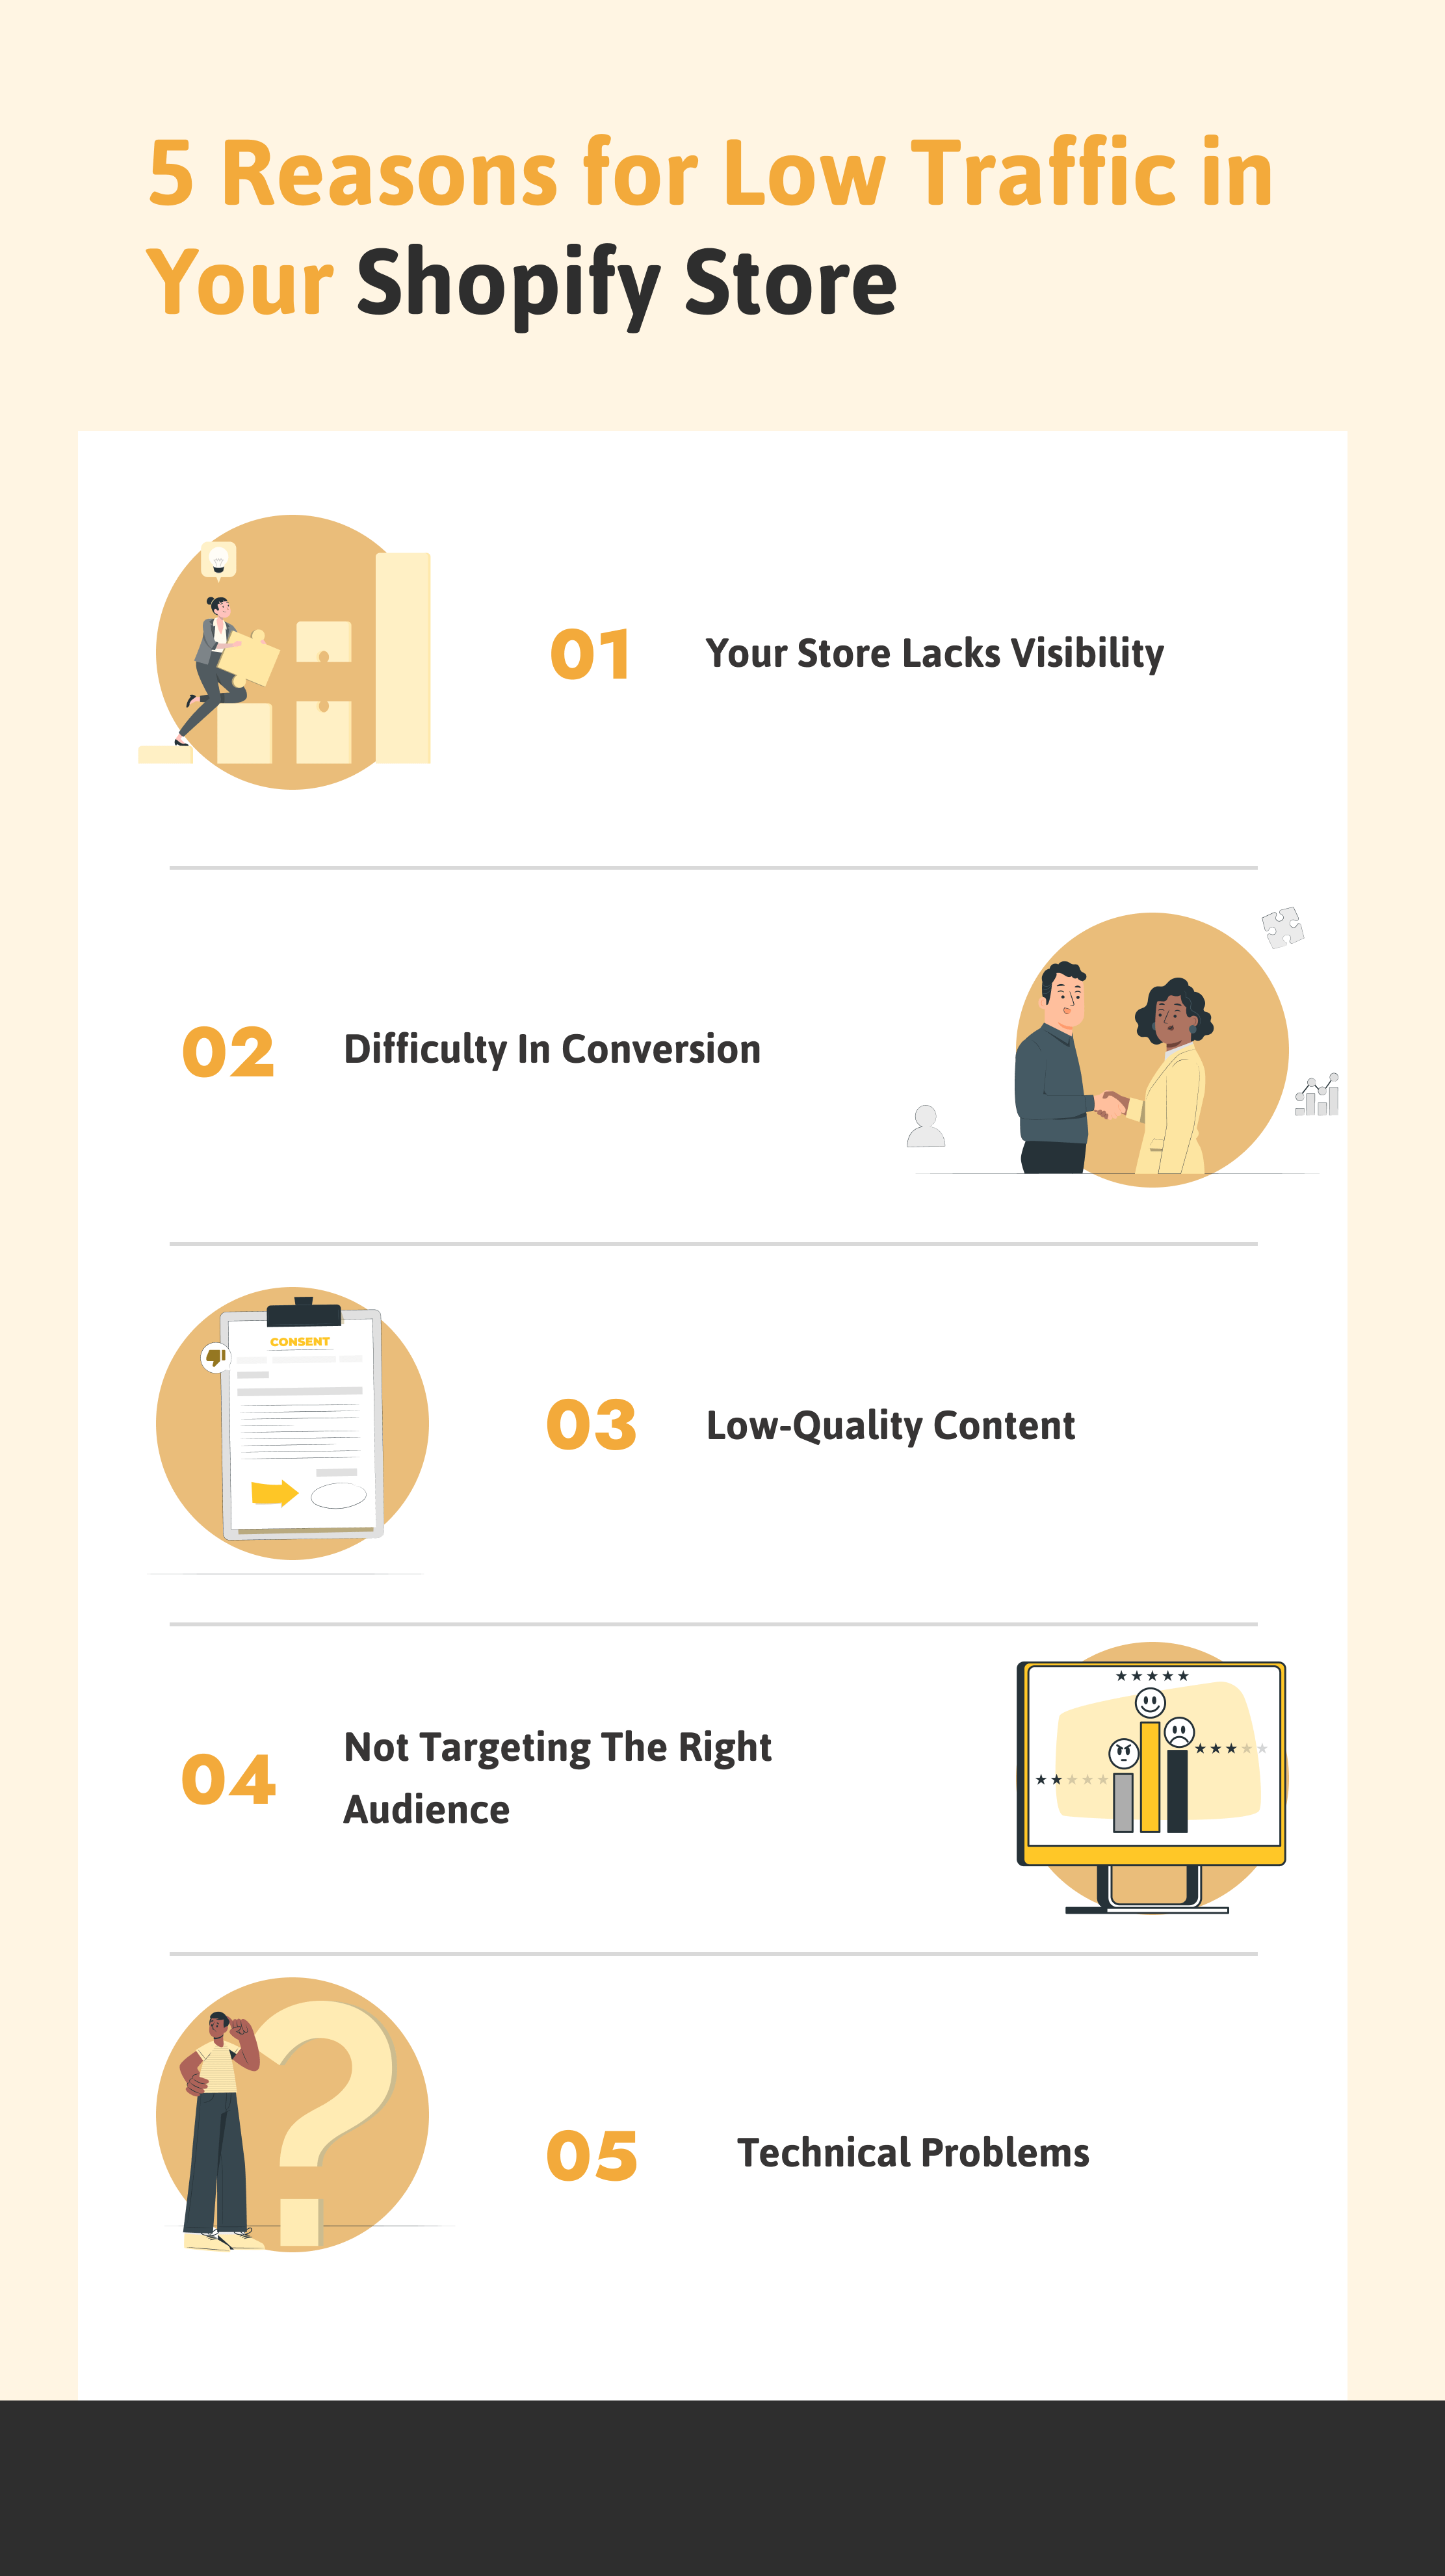 5 reasons for low traffic in your shopify store - Infographic